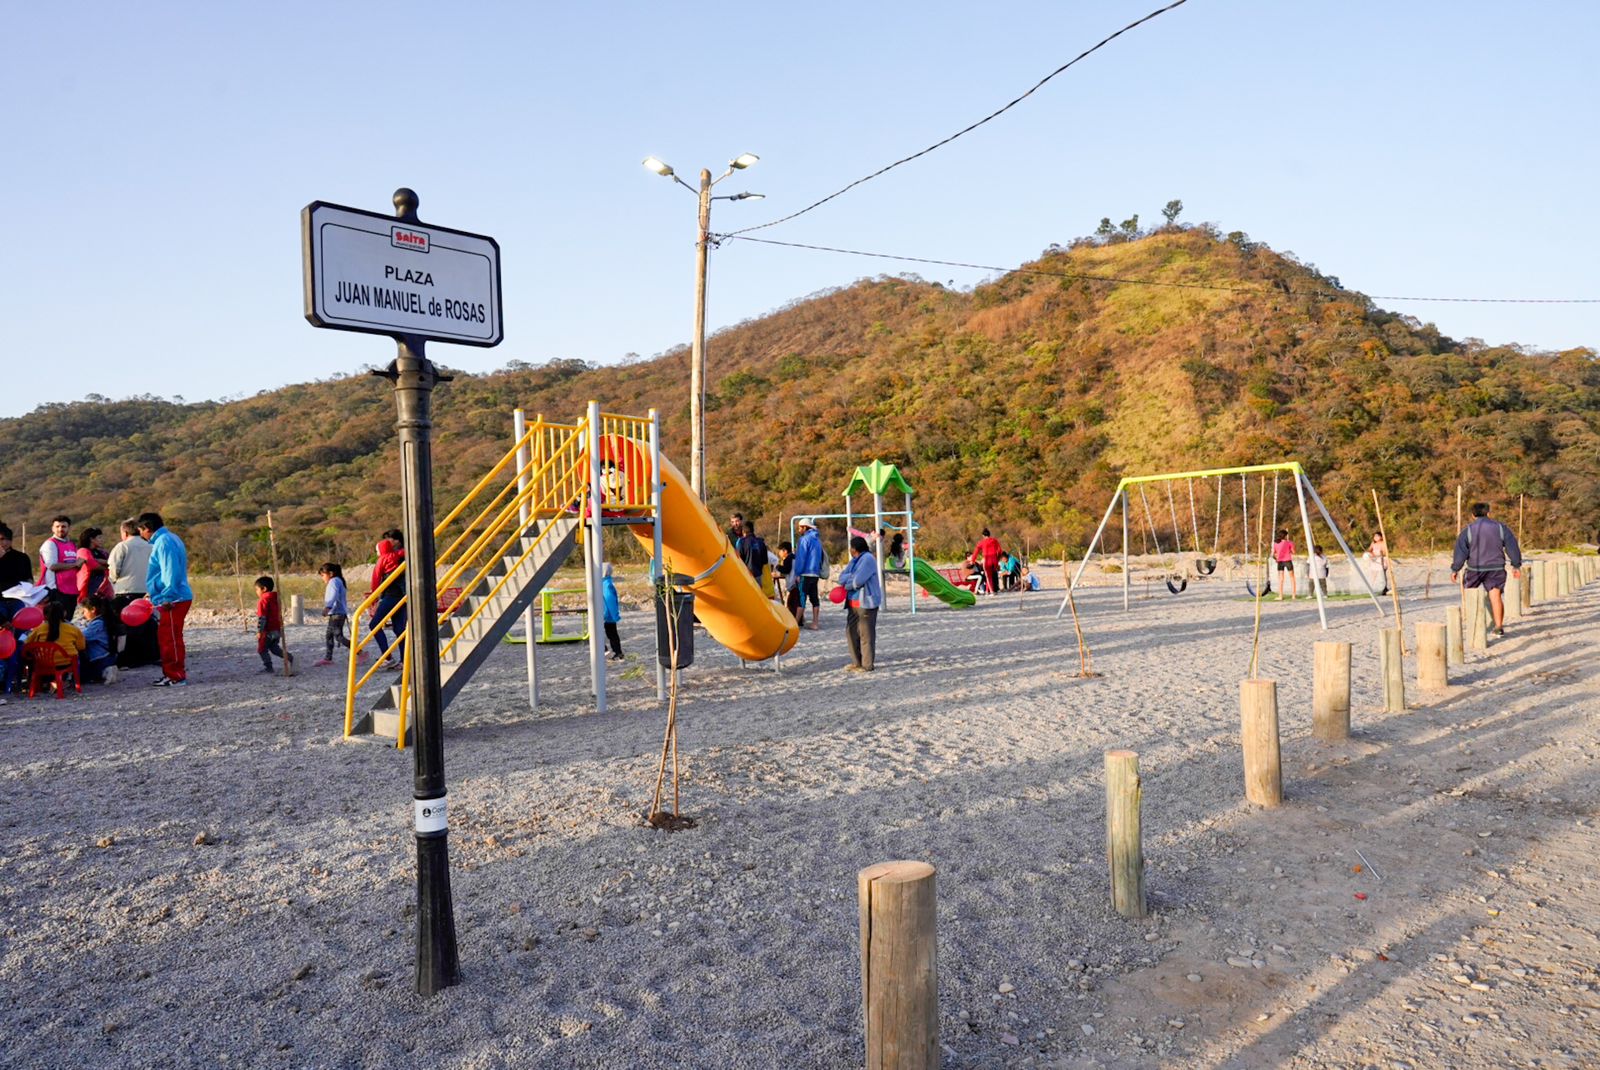 The municipality has converted a garbage dump into a neighborhood meeting and entertainment area – Municipalidad de Salta